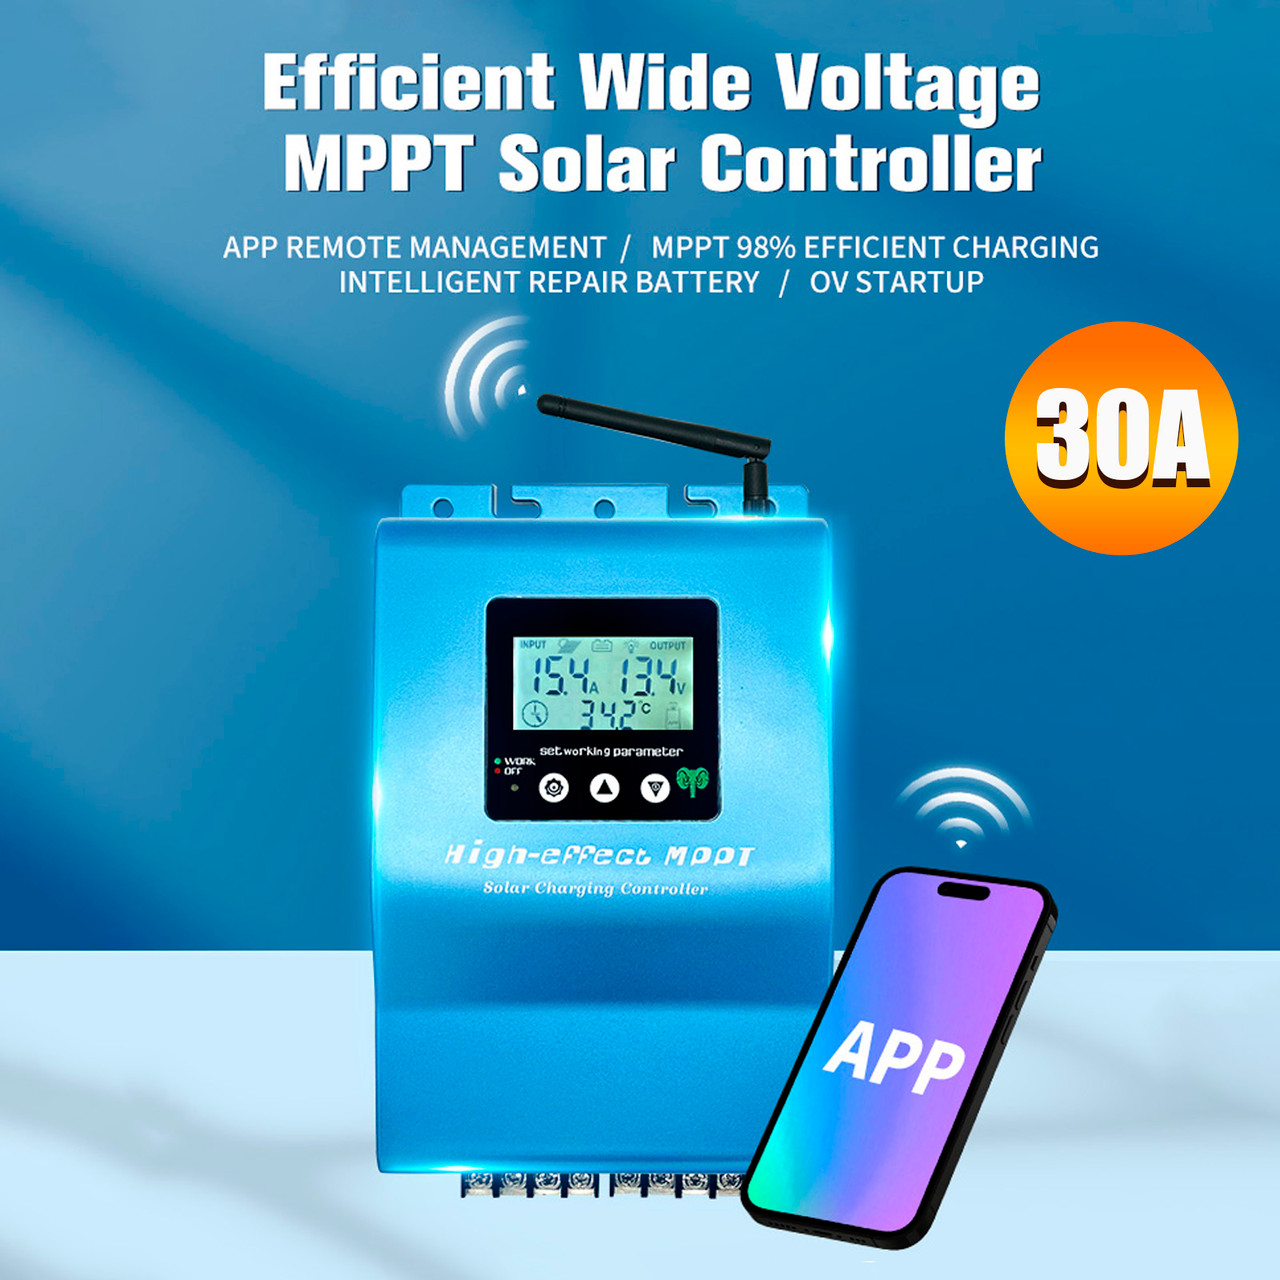 30A MPPT Solar Controller Smart APP to Remotely Manage Photovoltaic Controller